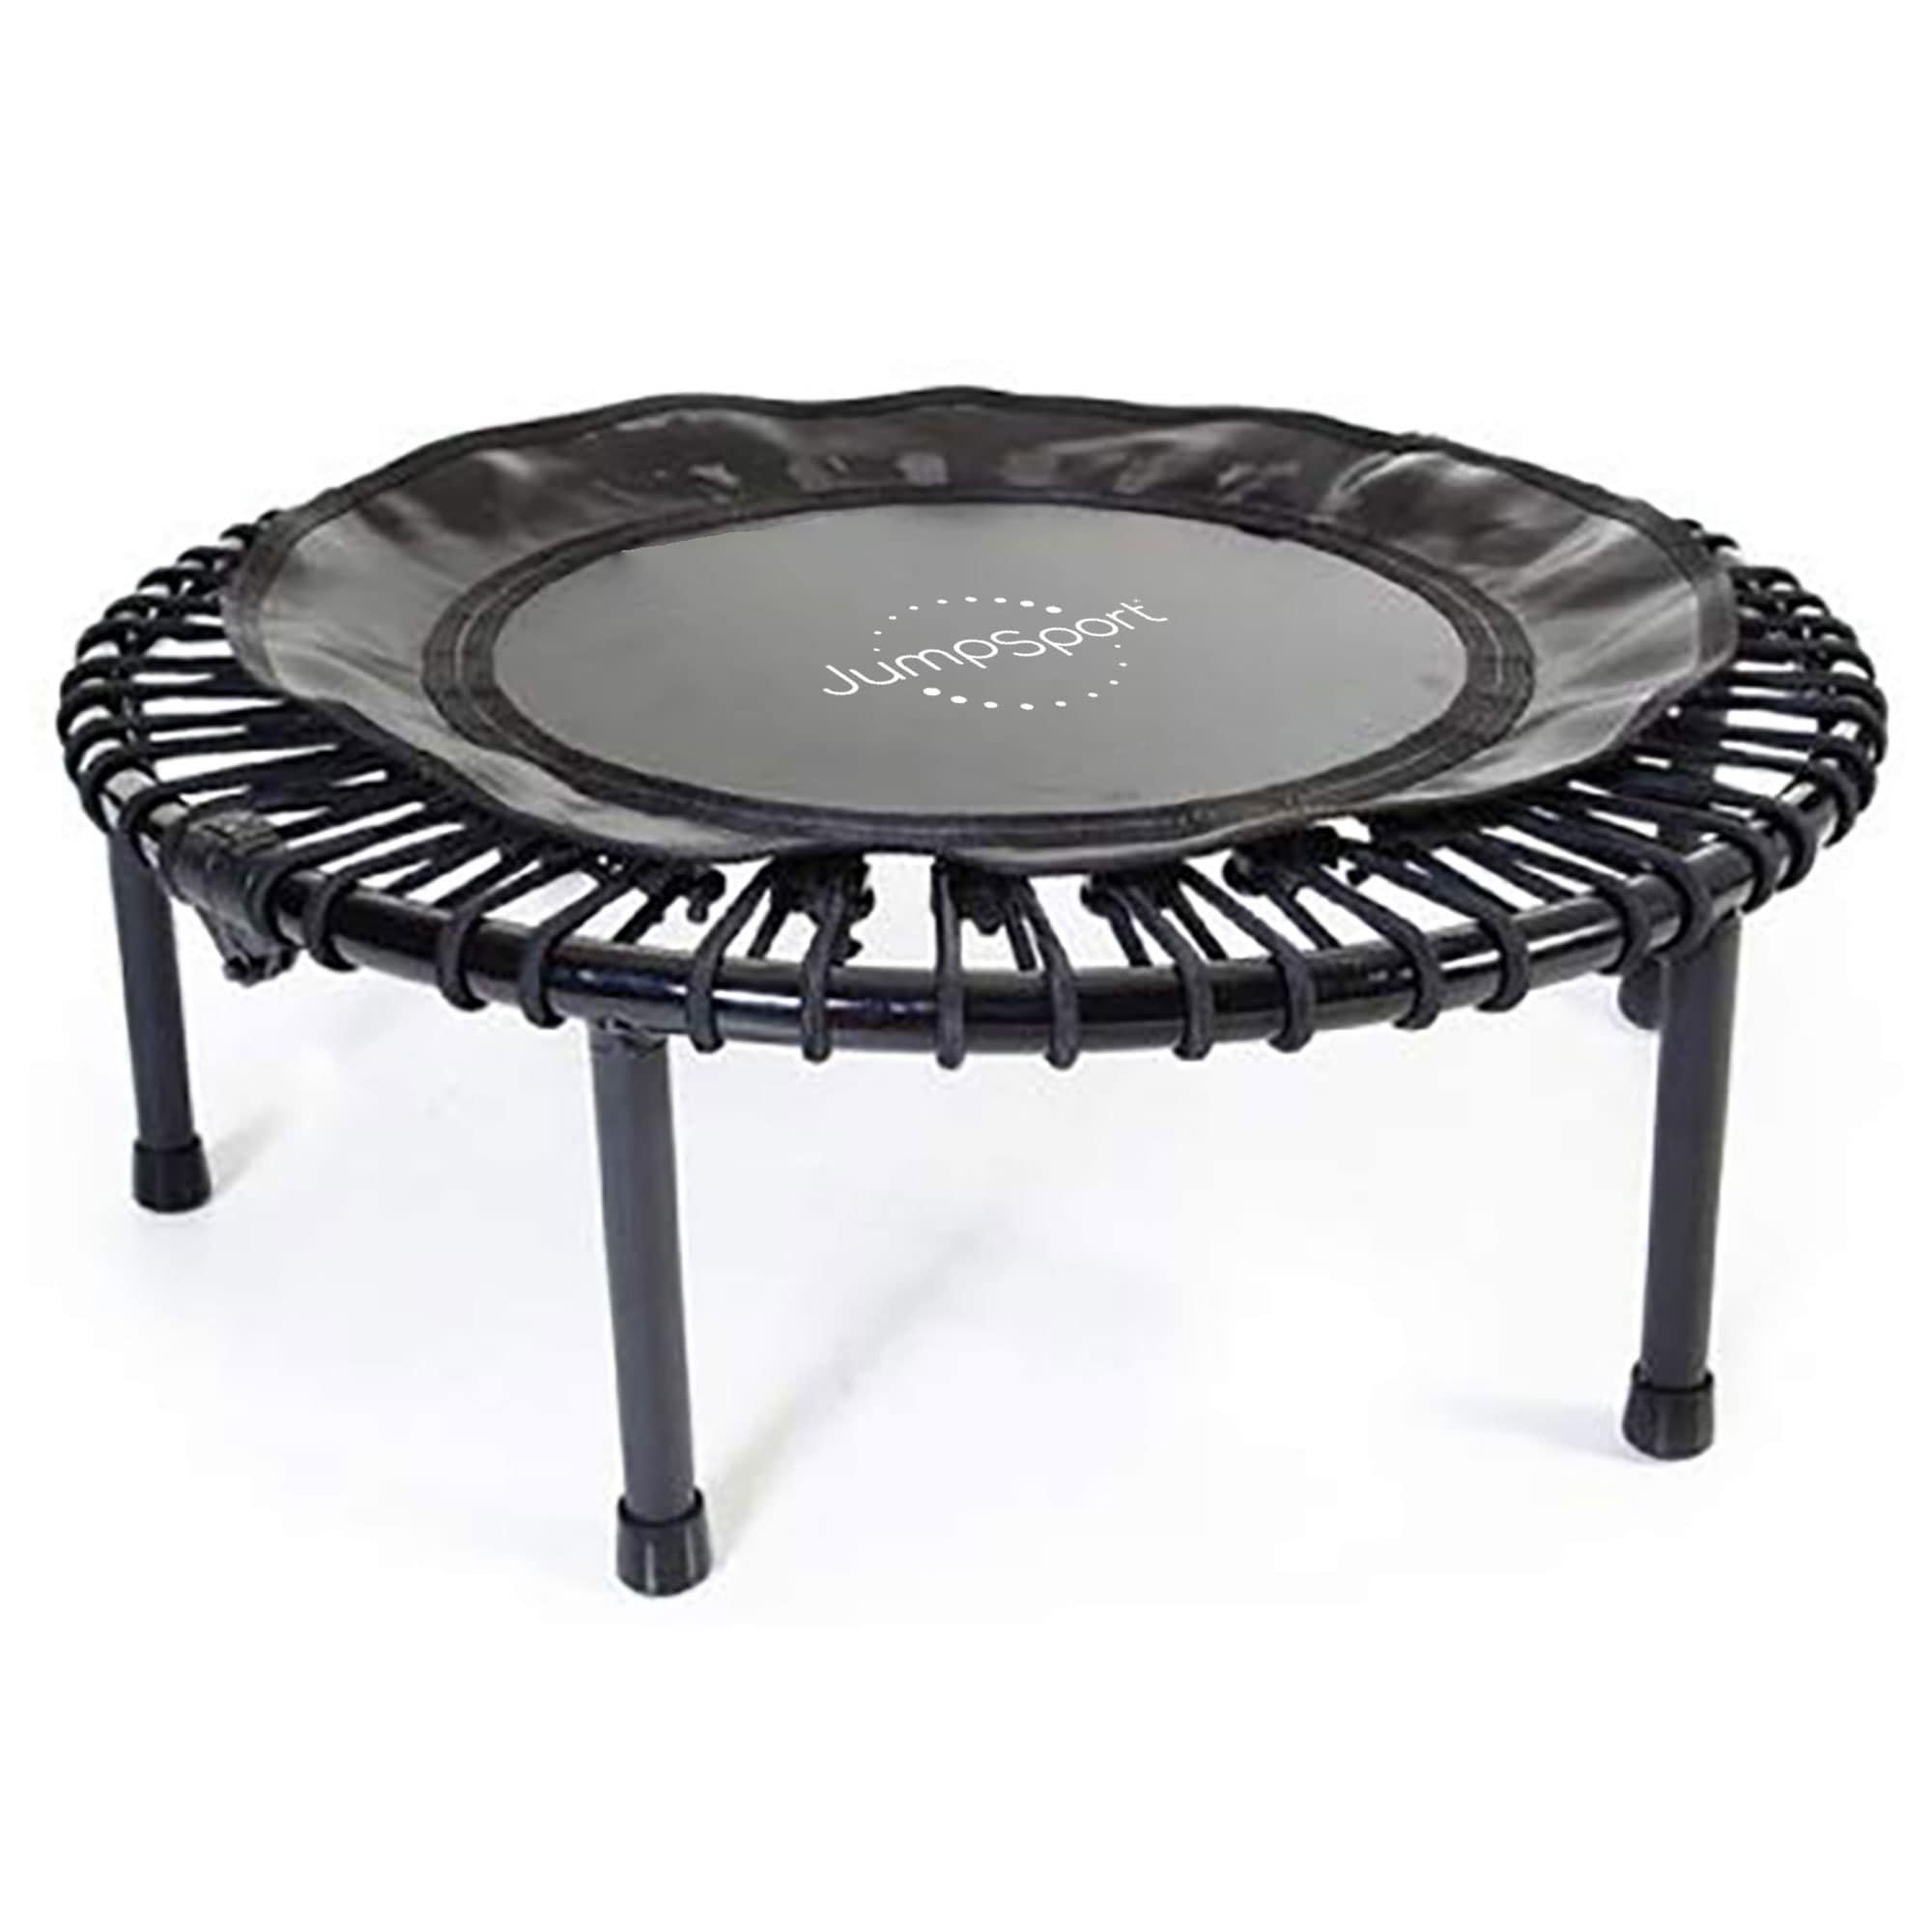 JumpSport 230F Folding Fitness Rebounder Trampoline for In Home Cardio  Fitness - 21 - On Sale - Bed Bath & Beyond - 36002624